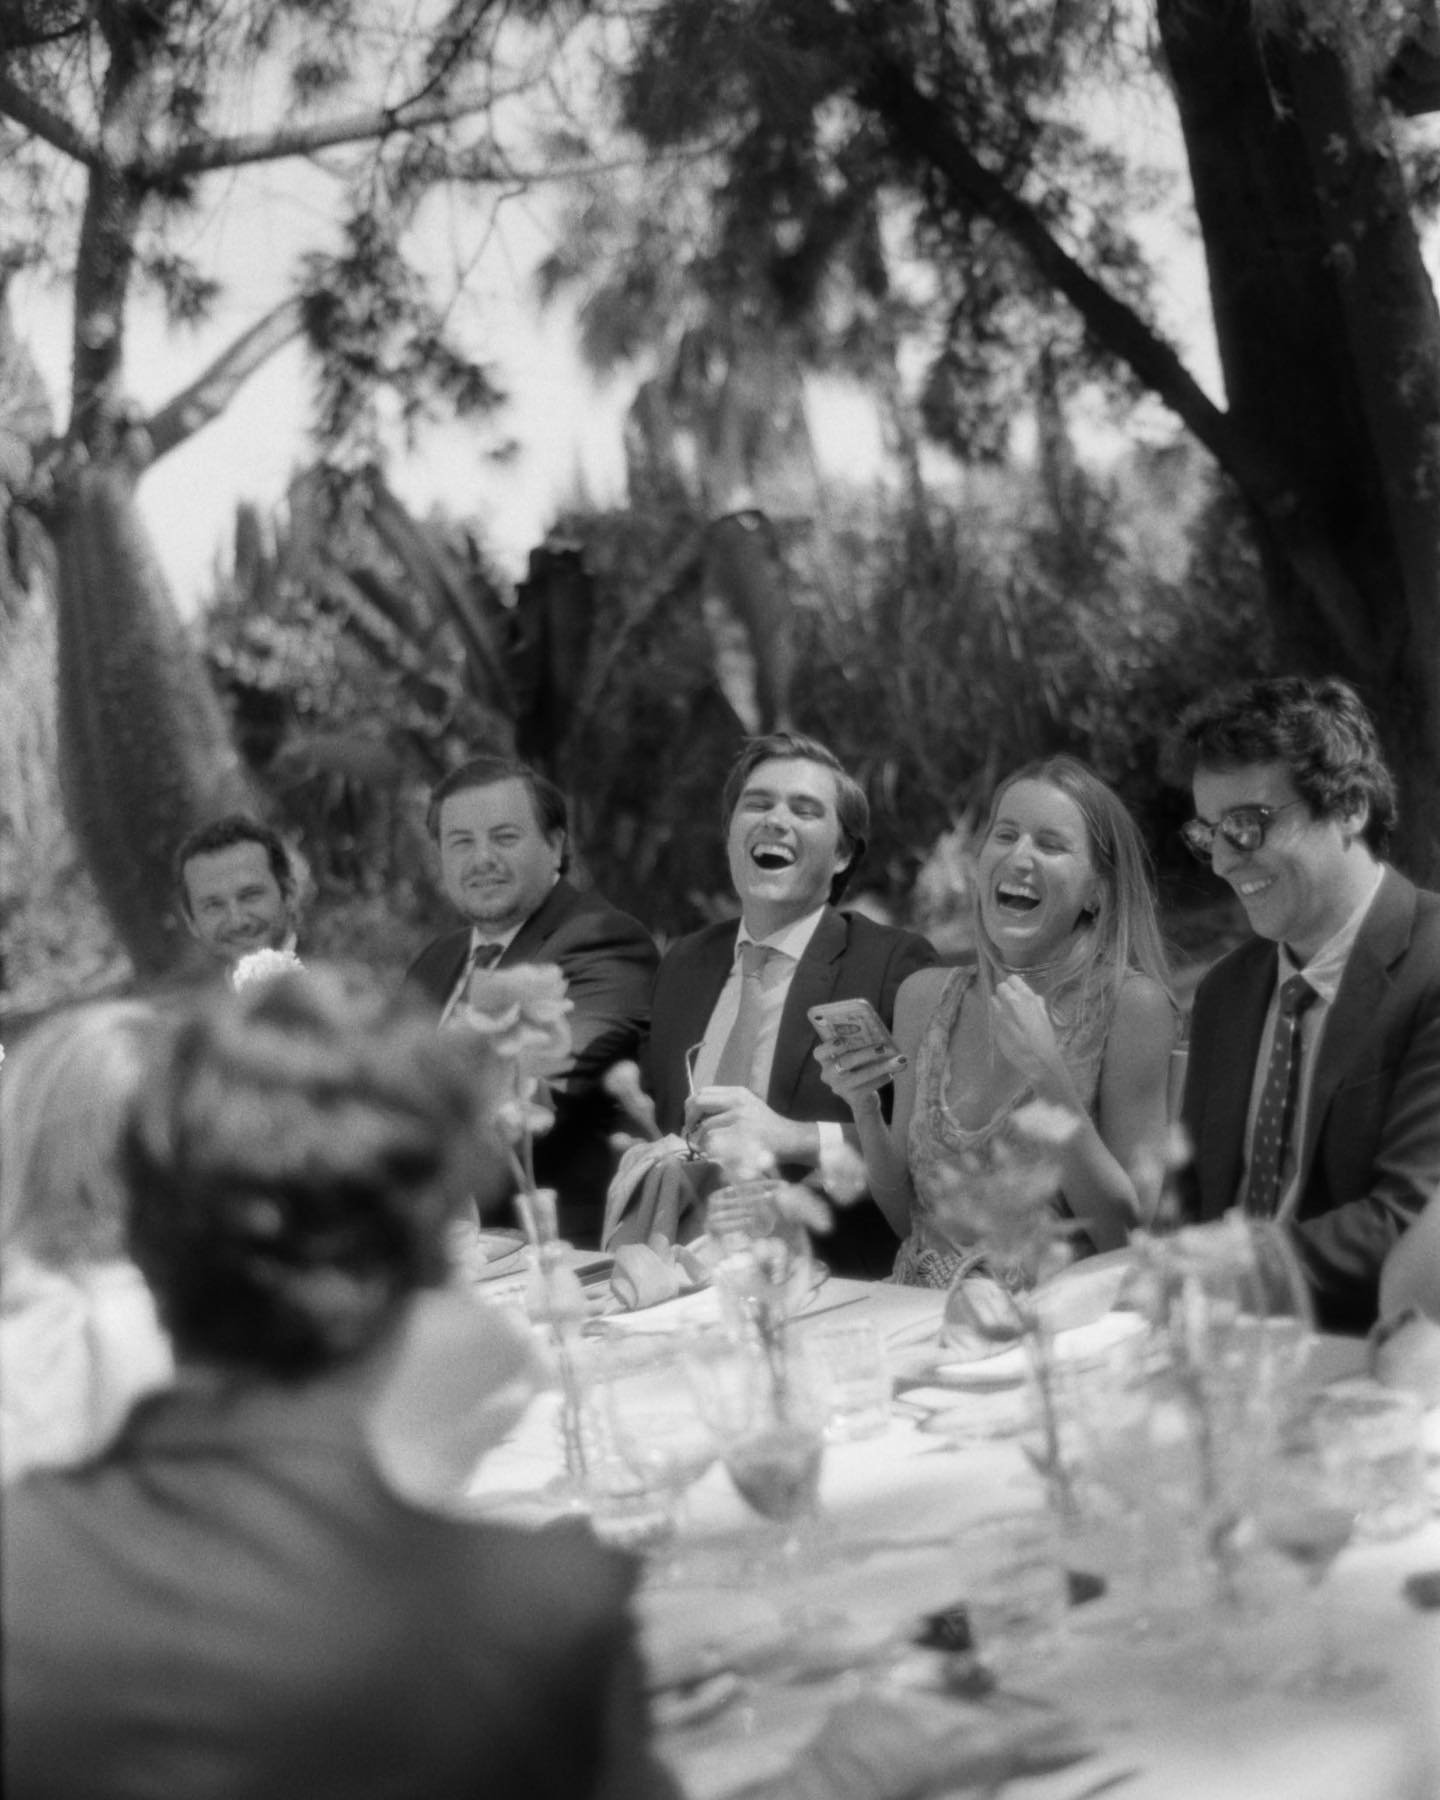 Some newly scanned negatives from the last wedding weekend.

with the beloved team
@macarenagea
@pilar_rdt
@cateringcinco
@huertodemontesinos 
@yellowdackel
@laboheme1994
@annagonzalezbeauty